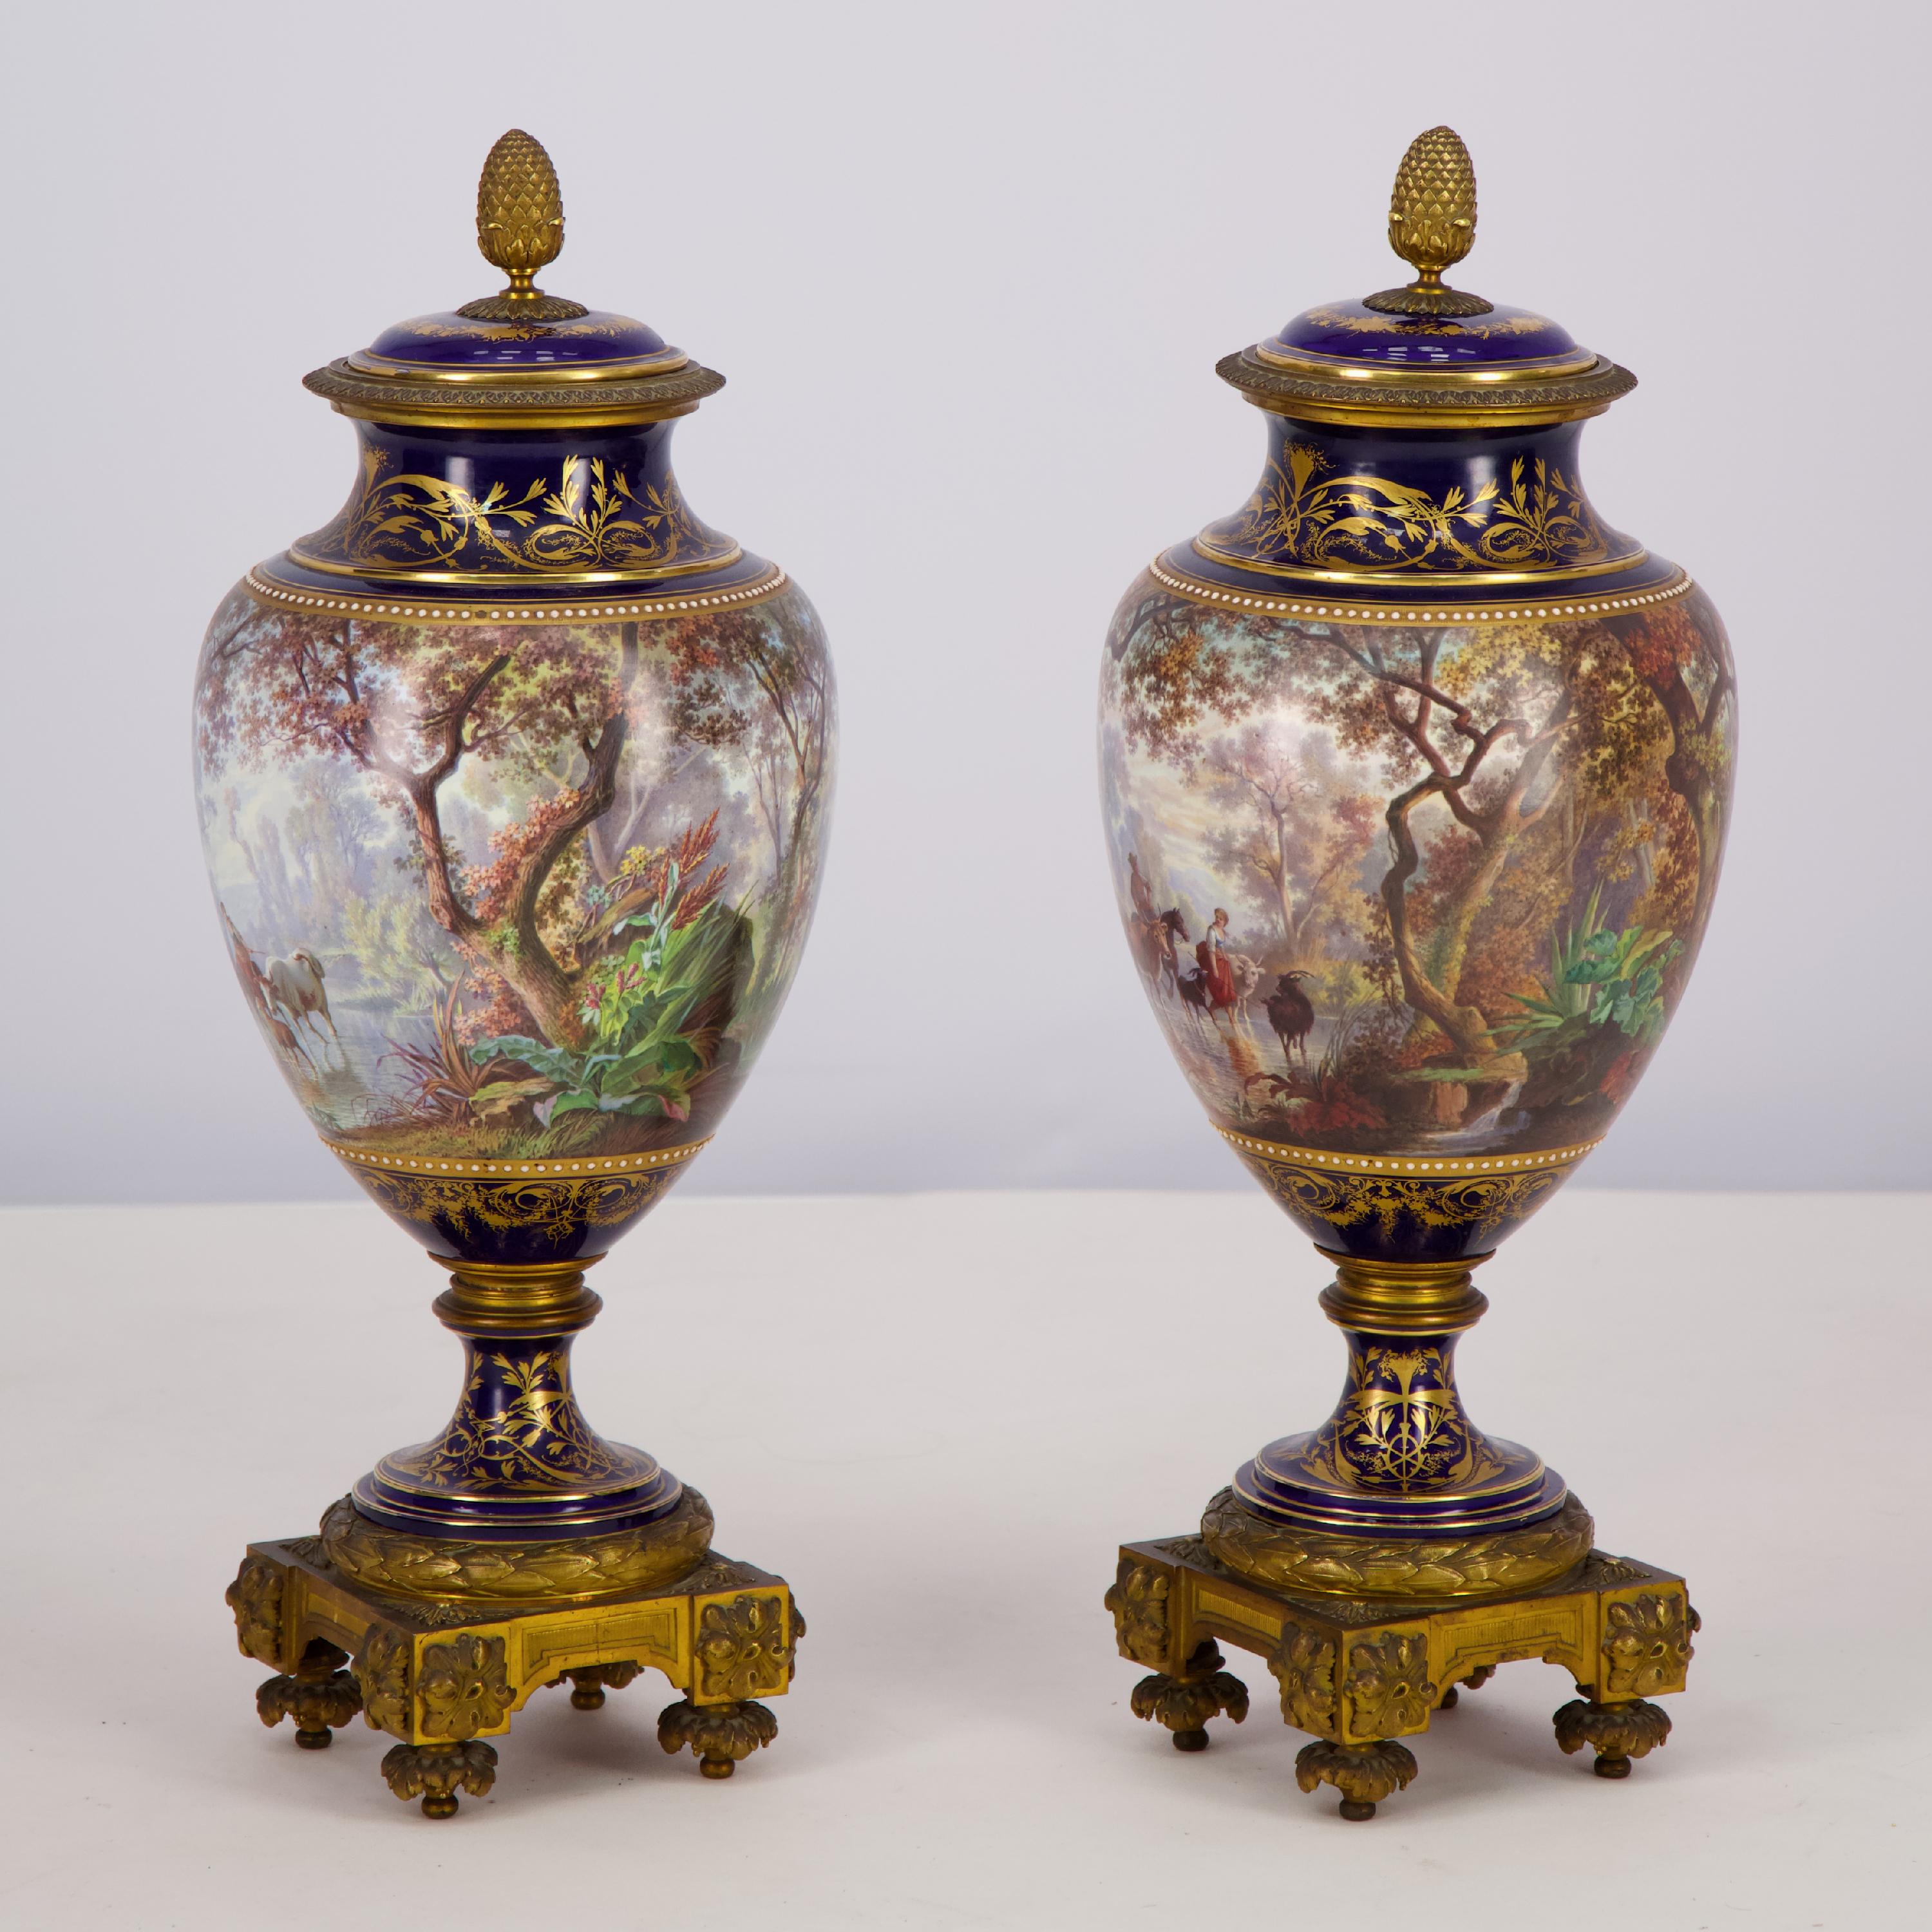 Napoleon III Pair of Sèvres porcelain vases mounted in gilt bronze painted by J. Machereau For Sale